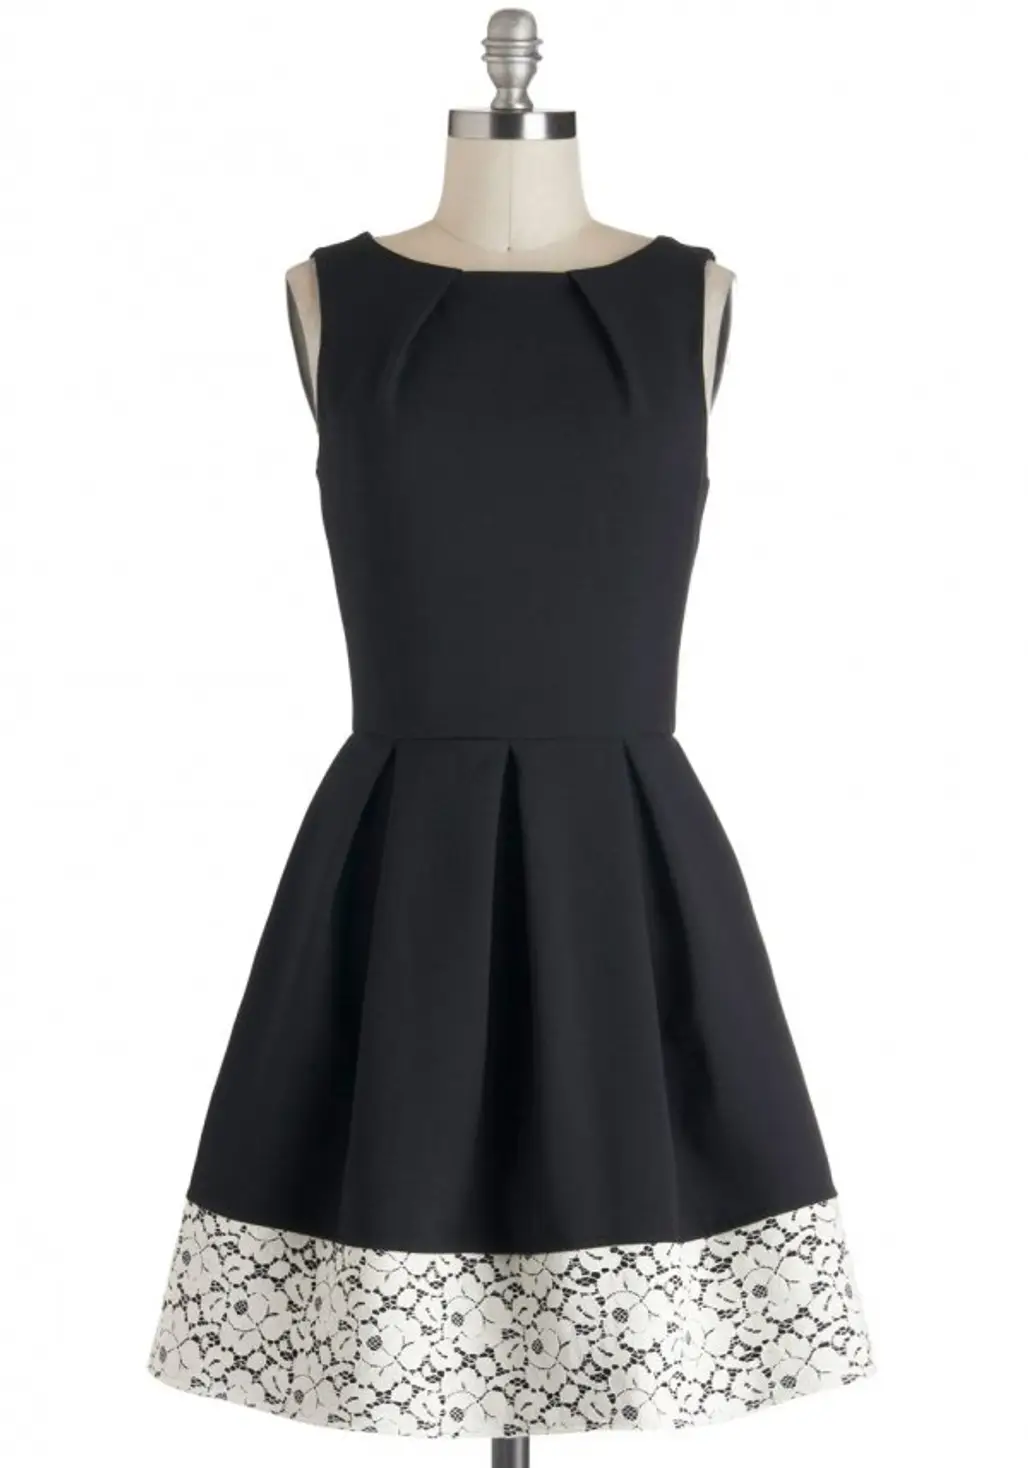 Audrey's Top of the a-Line Dress in Lace from Modcloth